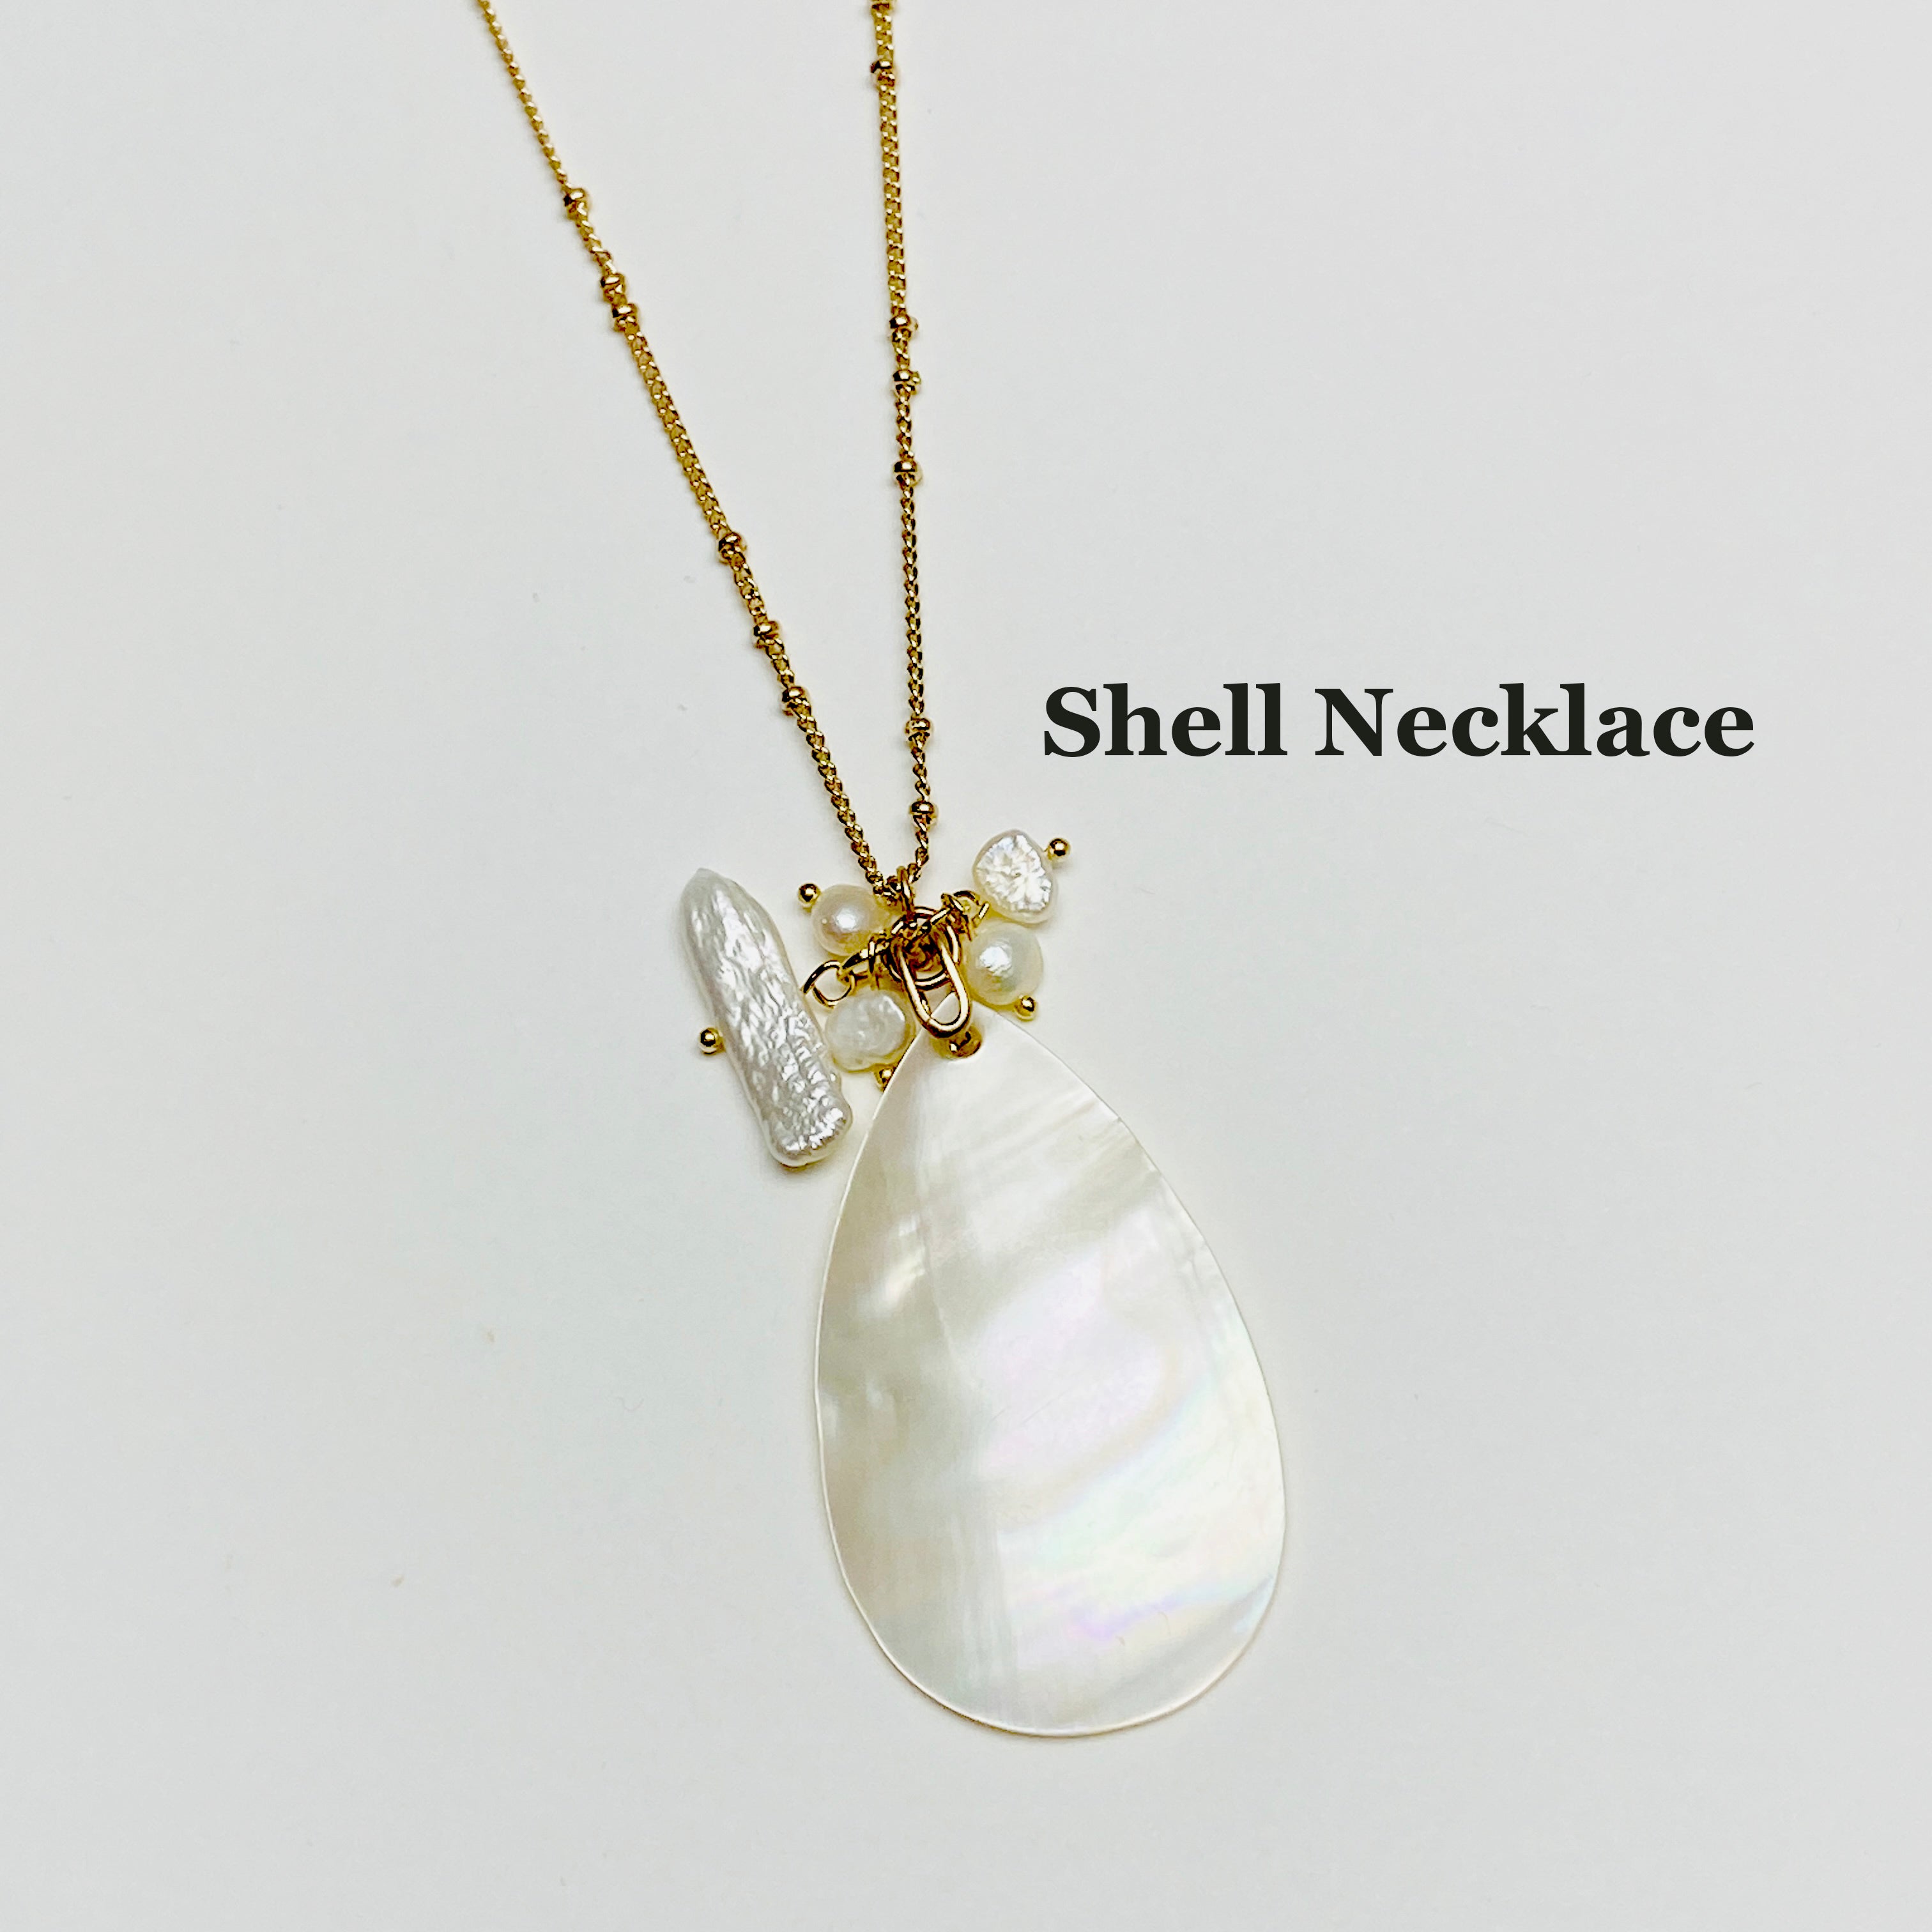 Smooth Puka Shell Necklace - 20 inches | Ron Jon Surf Shop